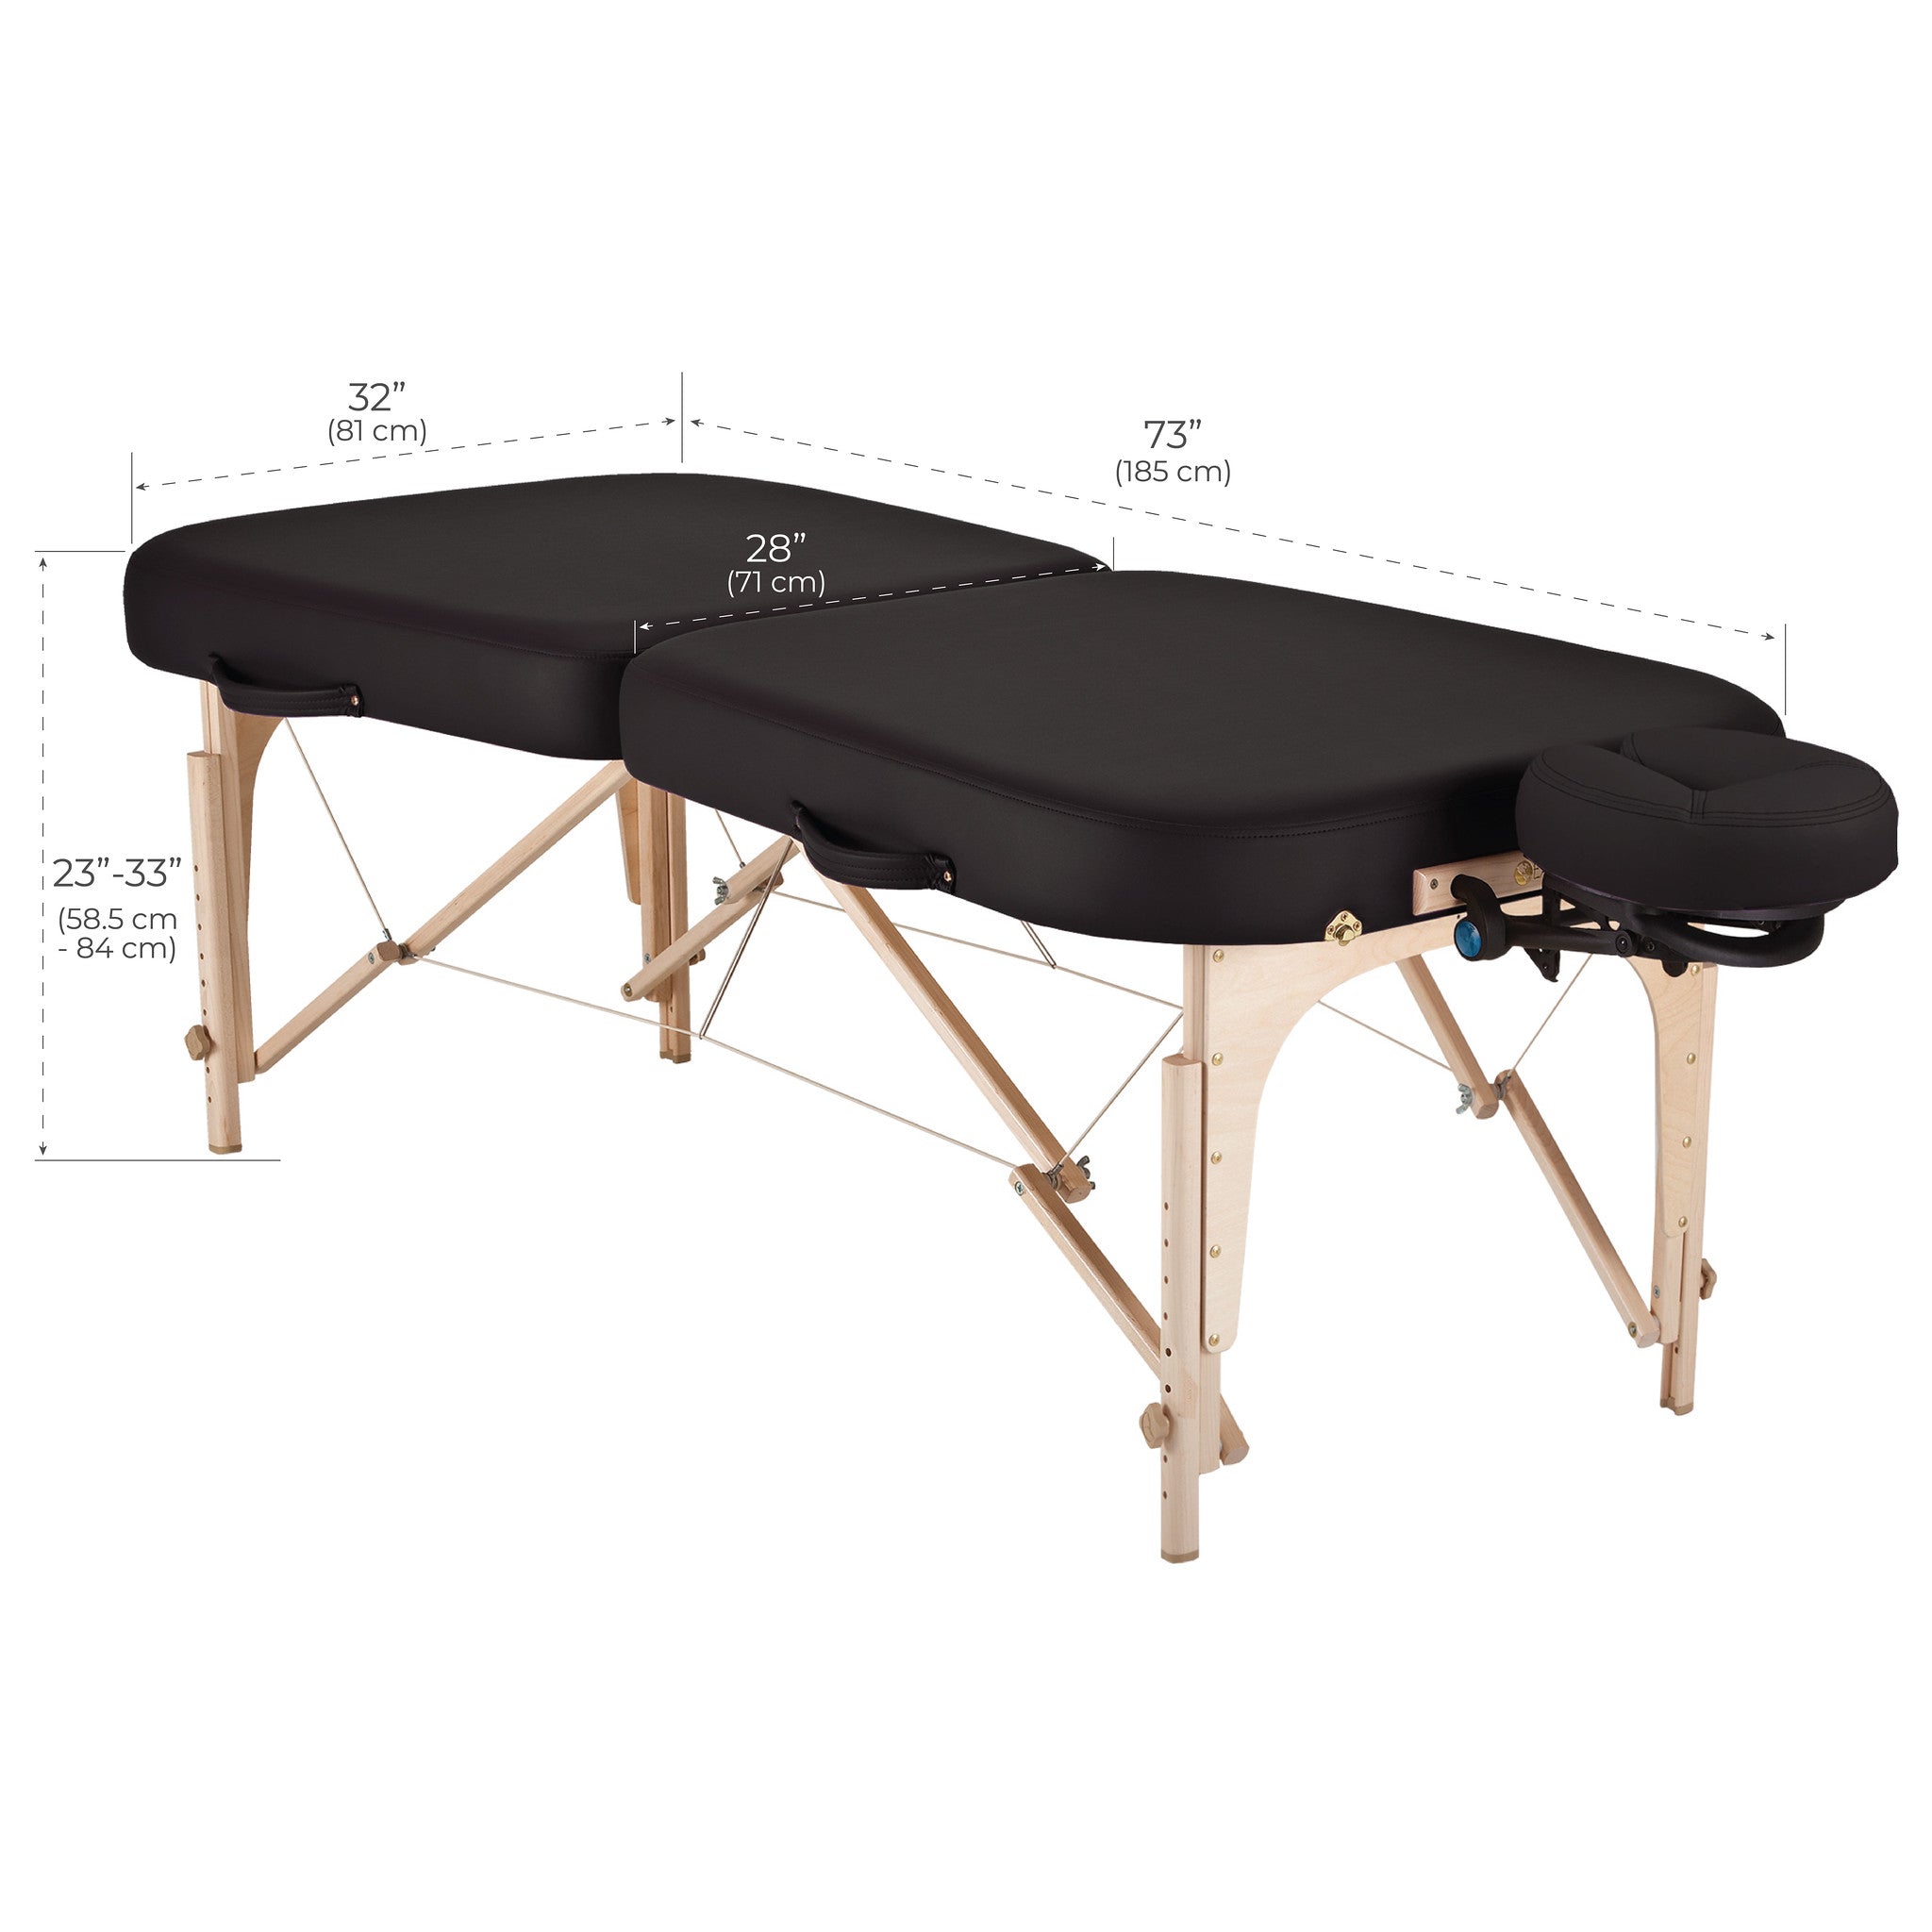 EarthLite Infinity 28"- 32" Massage Table Package